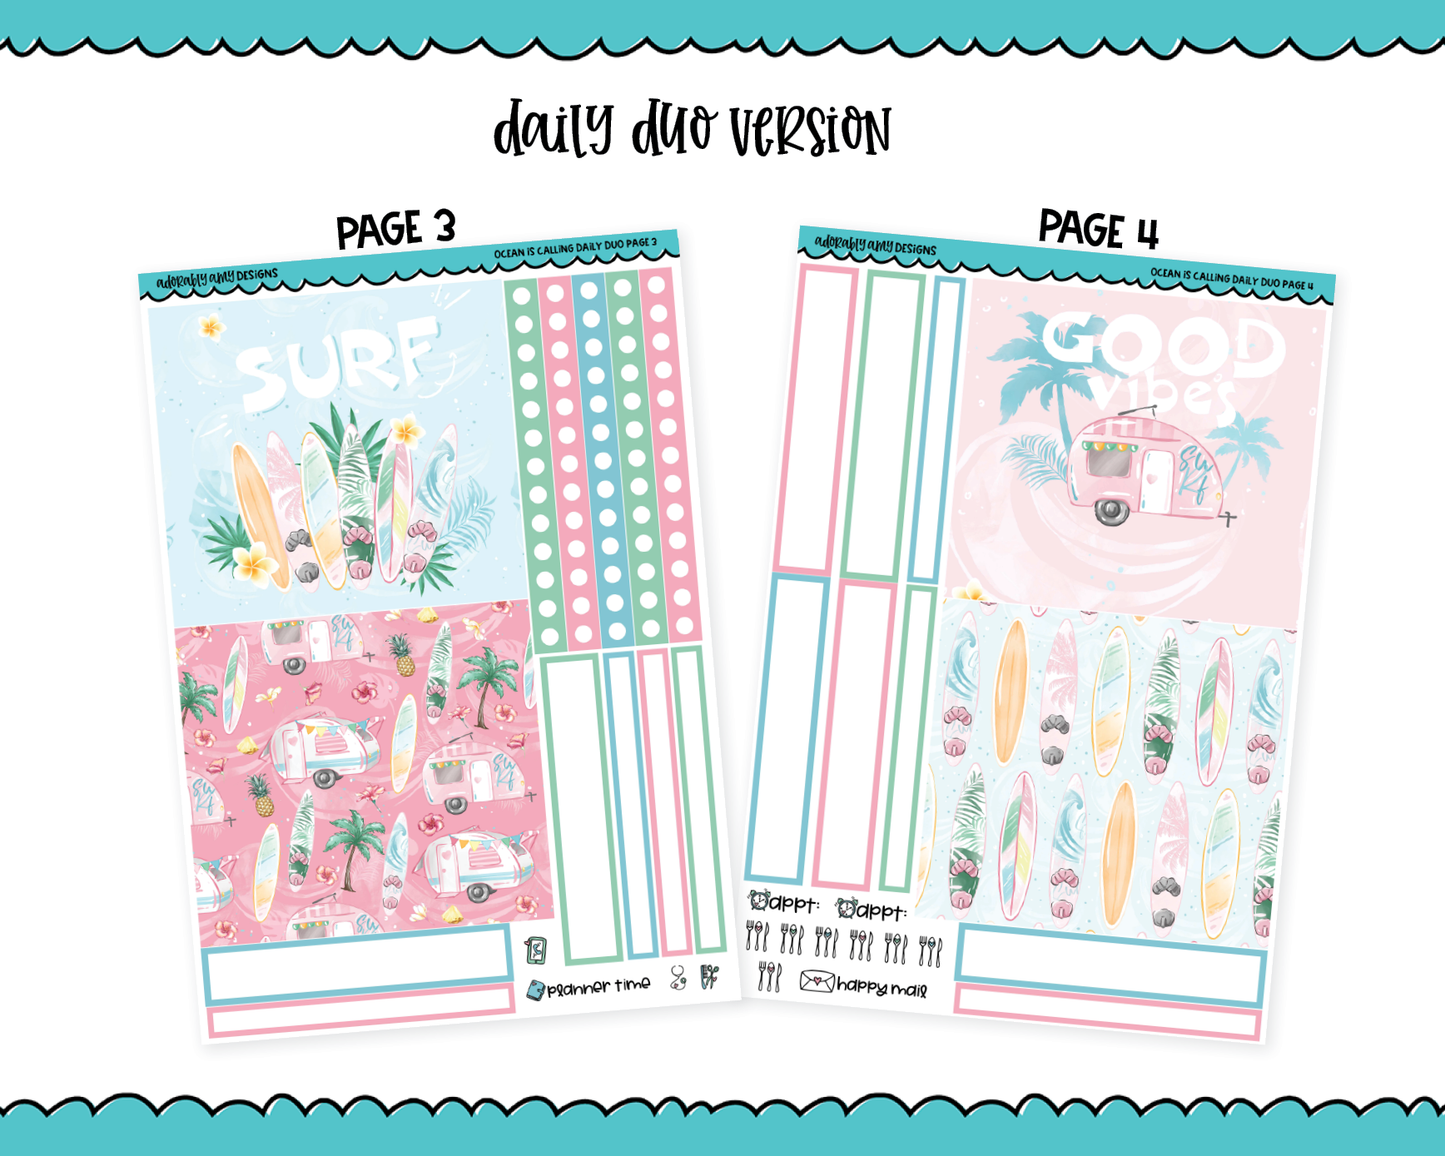 Daily Duo Ocean is Calling Themed Weekly Planner Sticker Kit for Daily Duo Planner